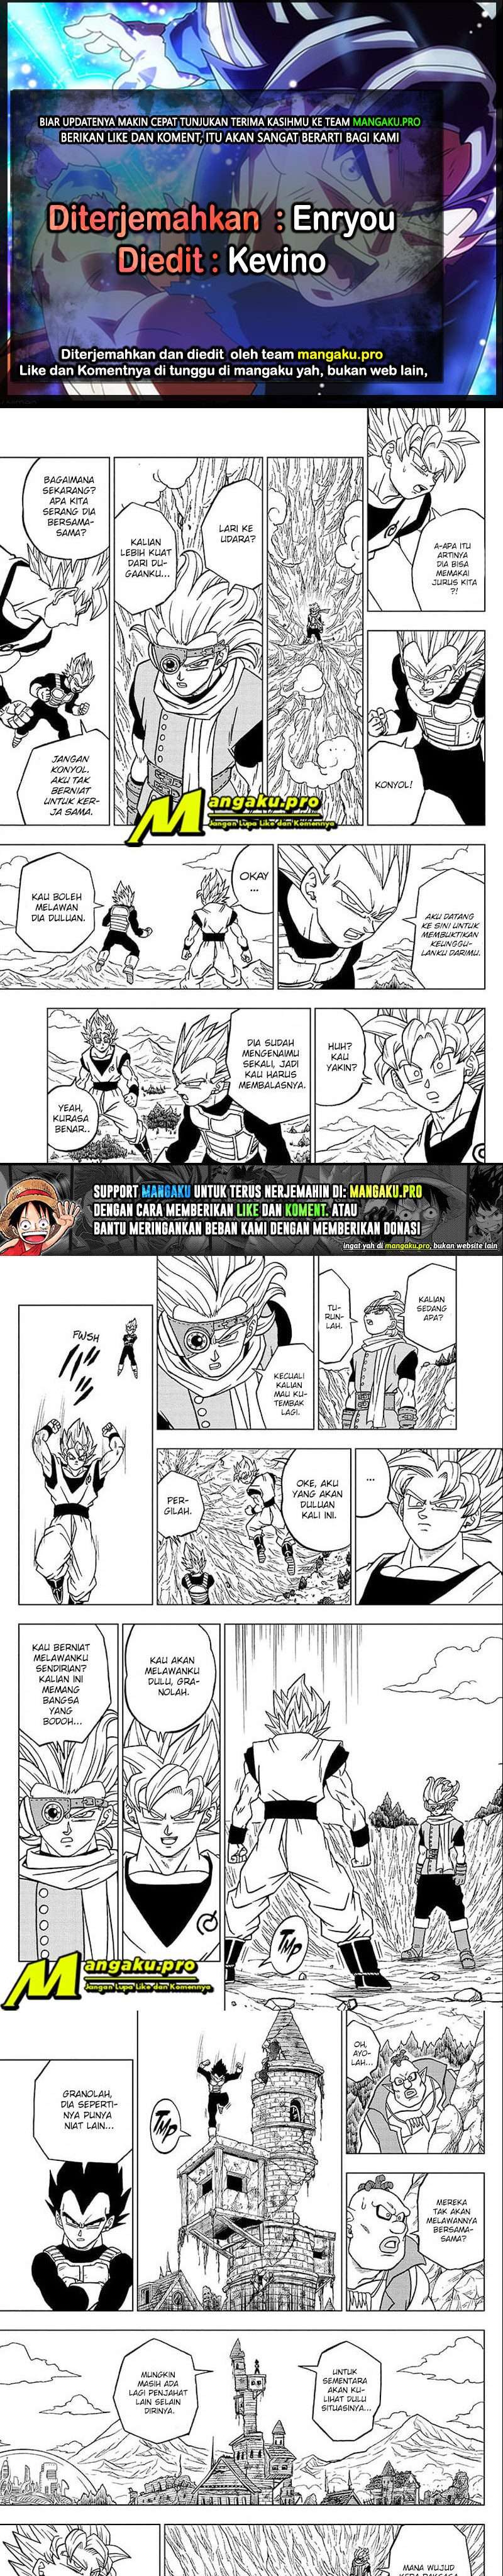 Dragon Ball Super: Chapter 72.2 - Page 1